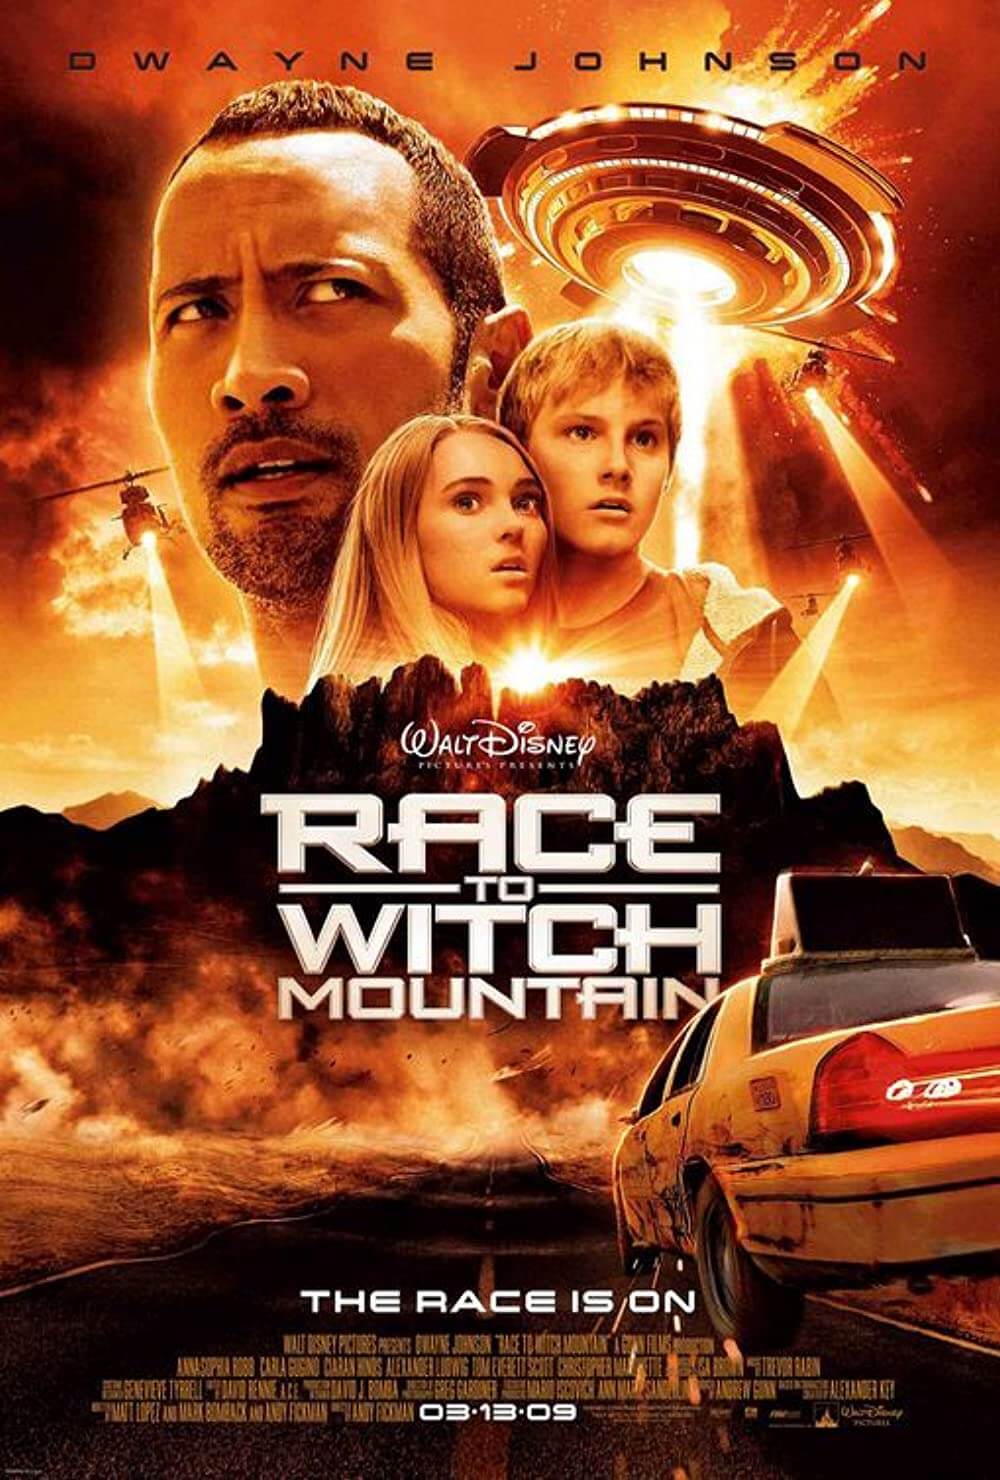  race-to-witch-mountain-thriller-movies